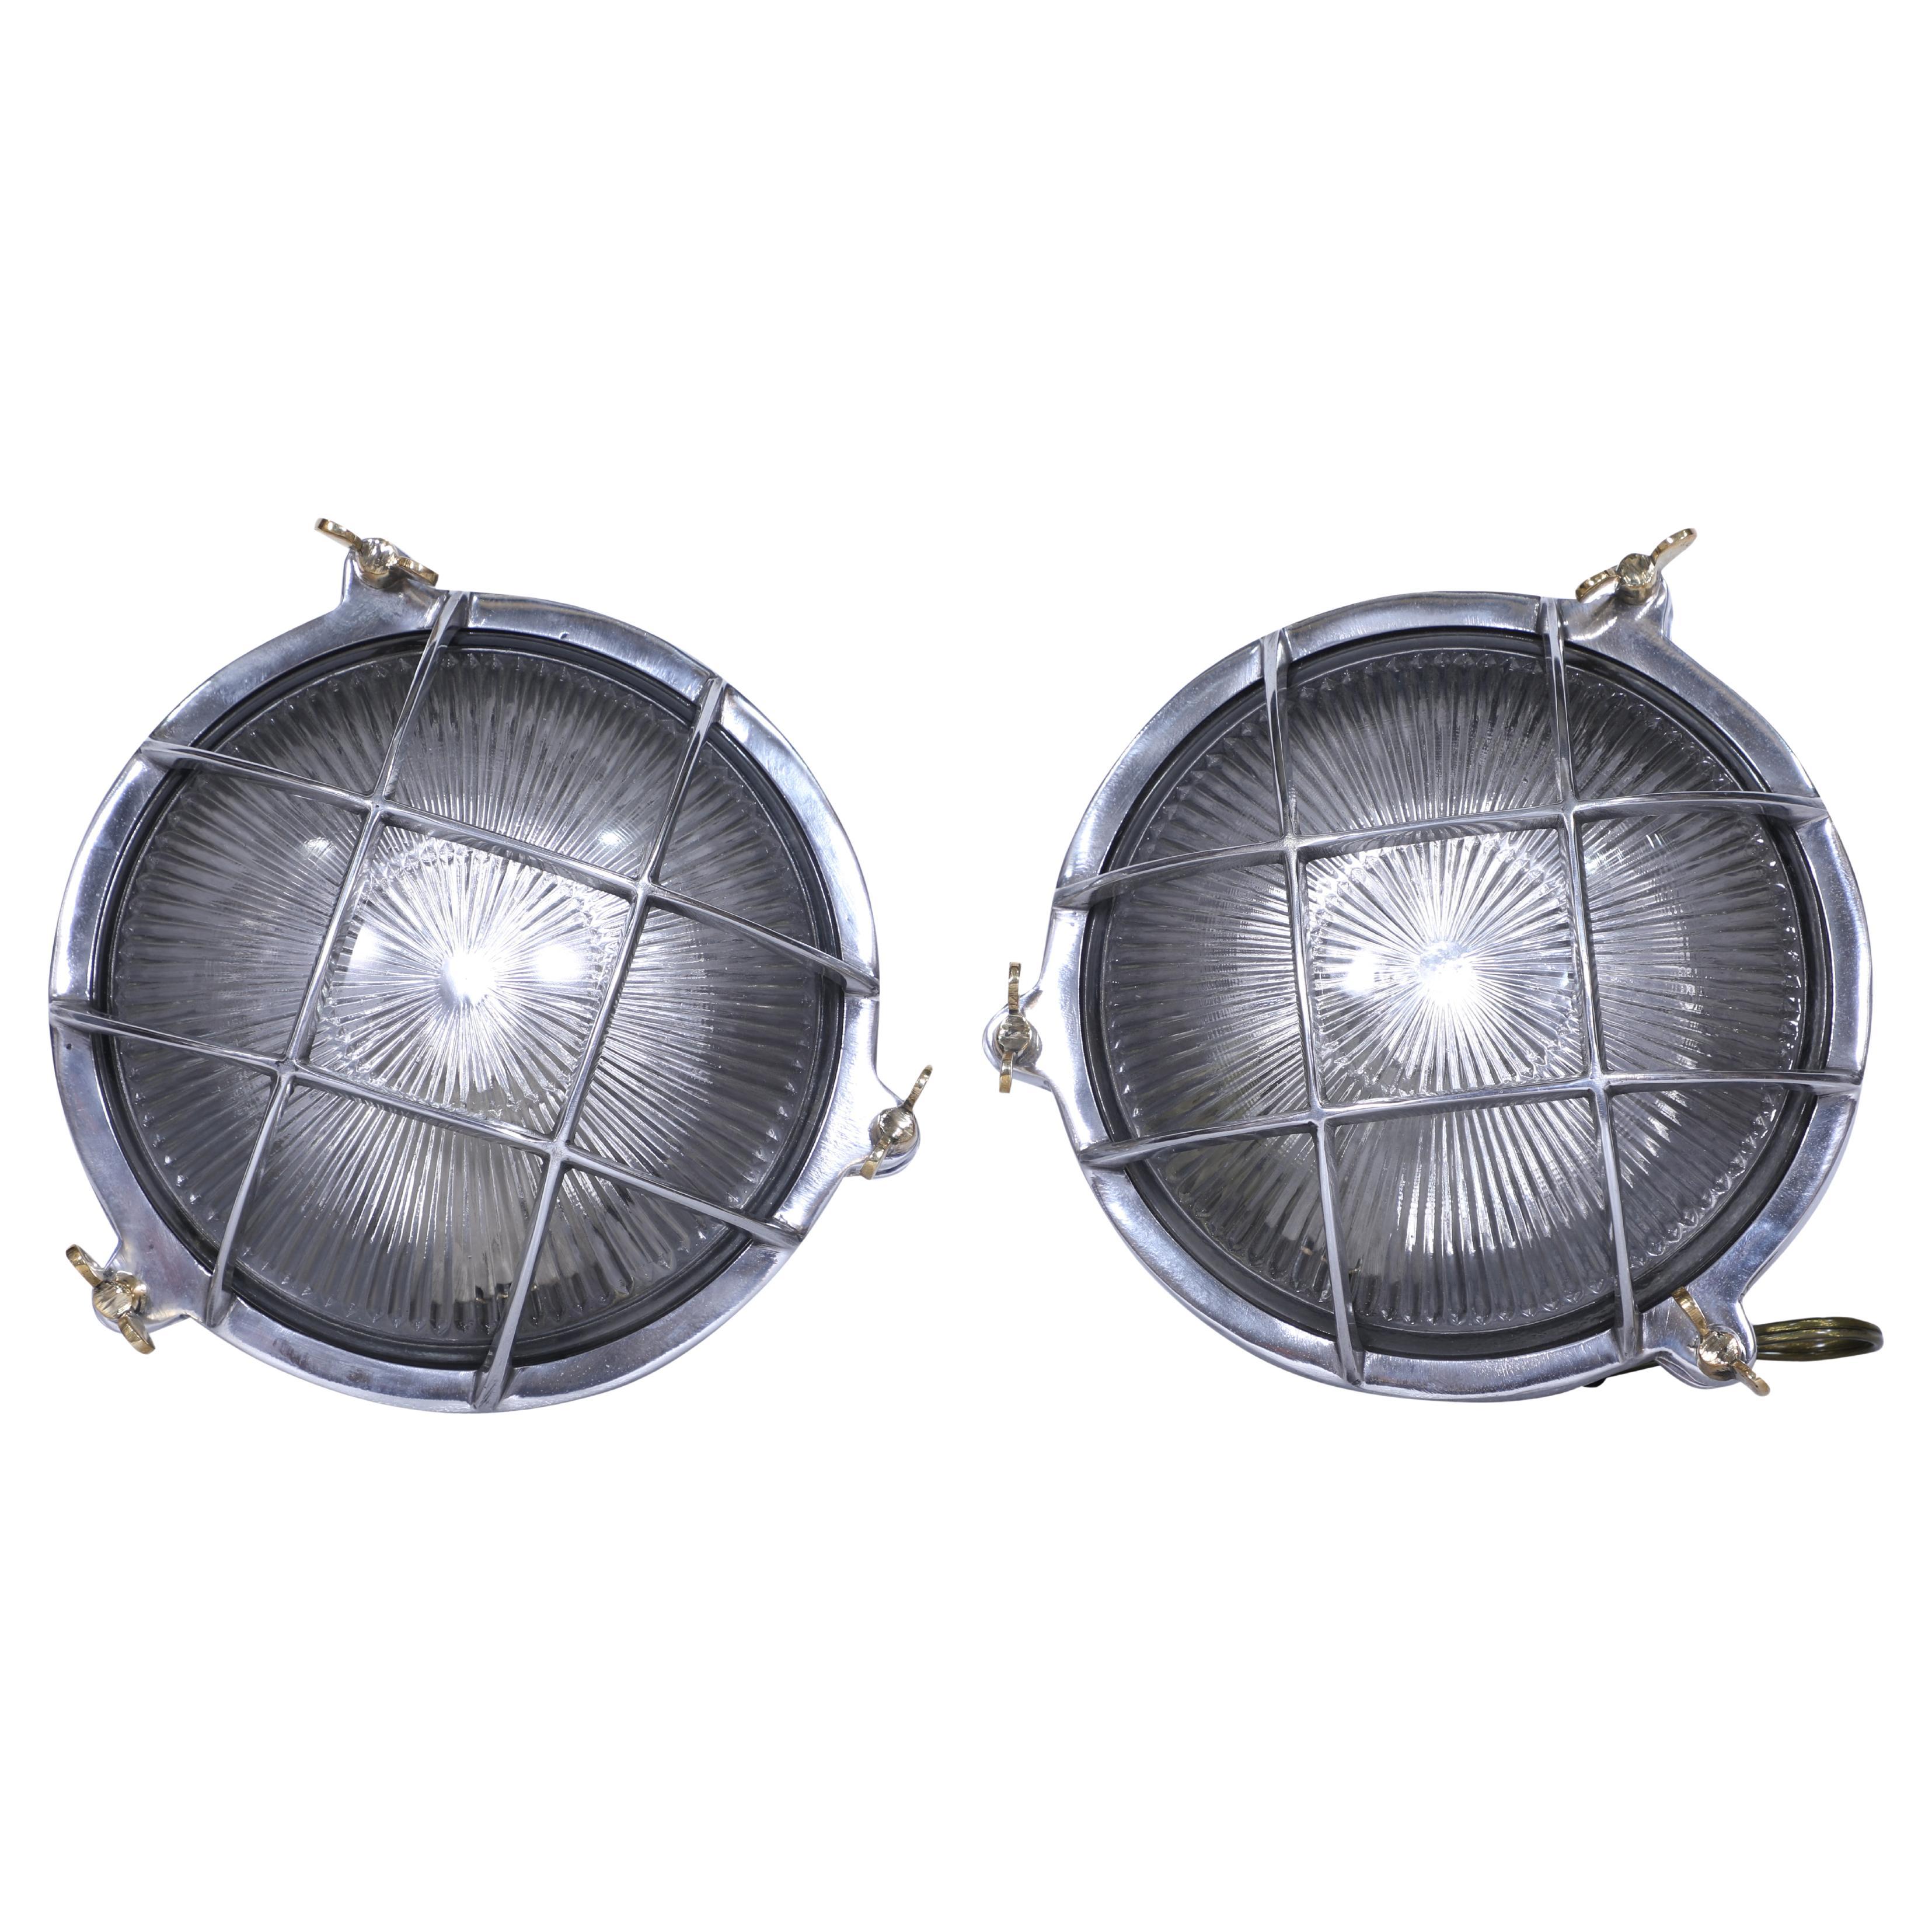 Pair of Chrome and Textured Glass Ship's Passageway Nautical Wall Lights